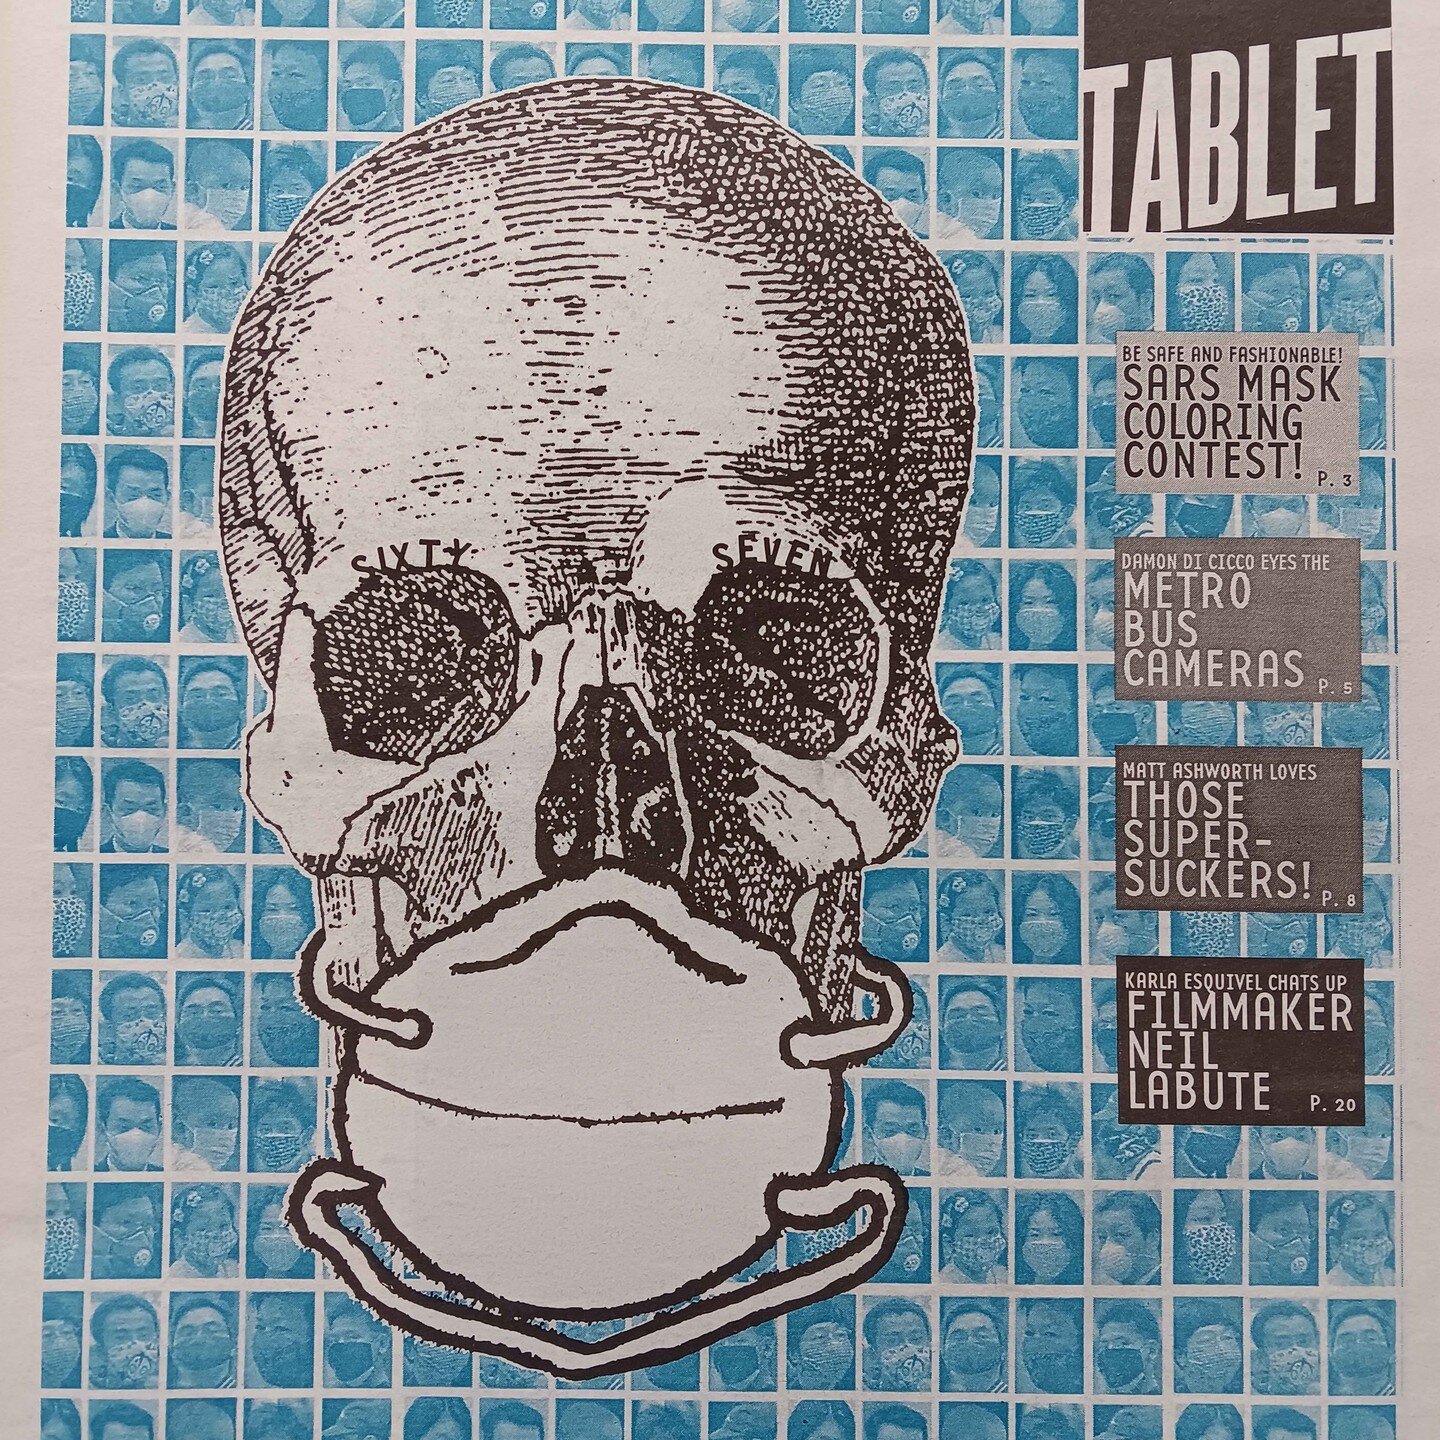 Typically awesome cover of Tablet when I started writing for it when it was a free Seattle biweekly, before going to magazine format.